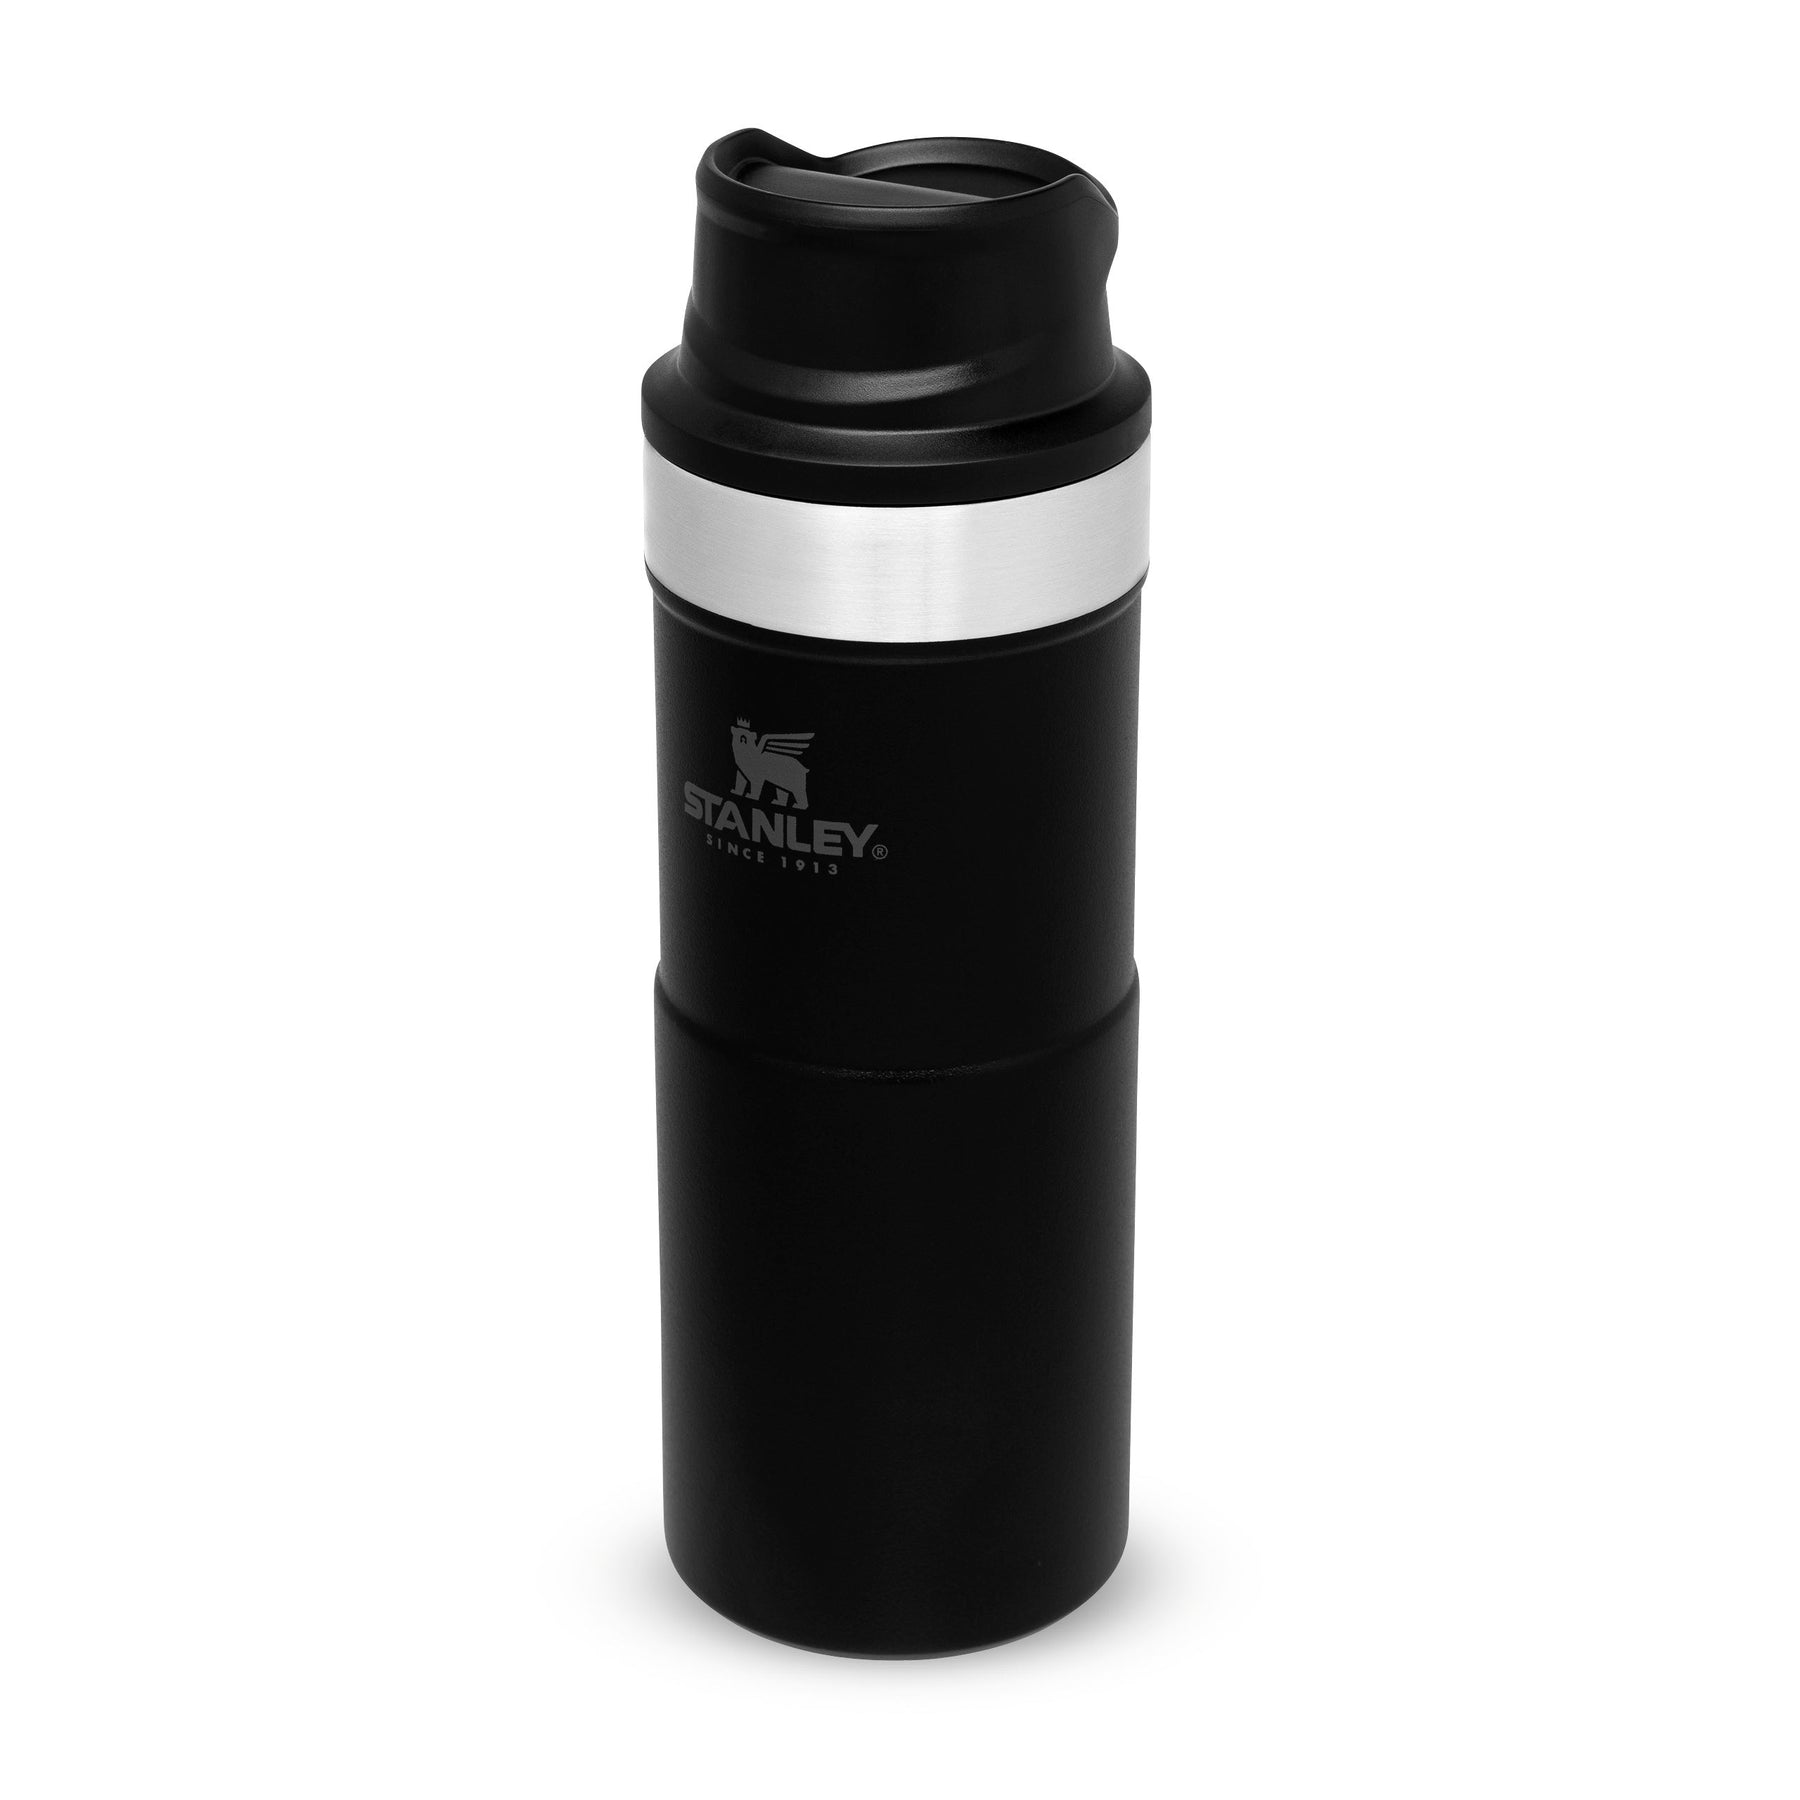 Stanley The Trigger-Action Travel Mug 470 ml, white, thermos